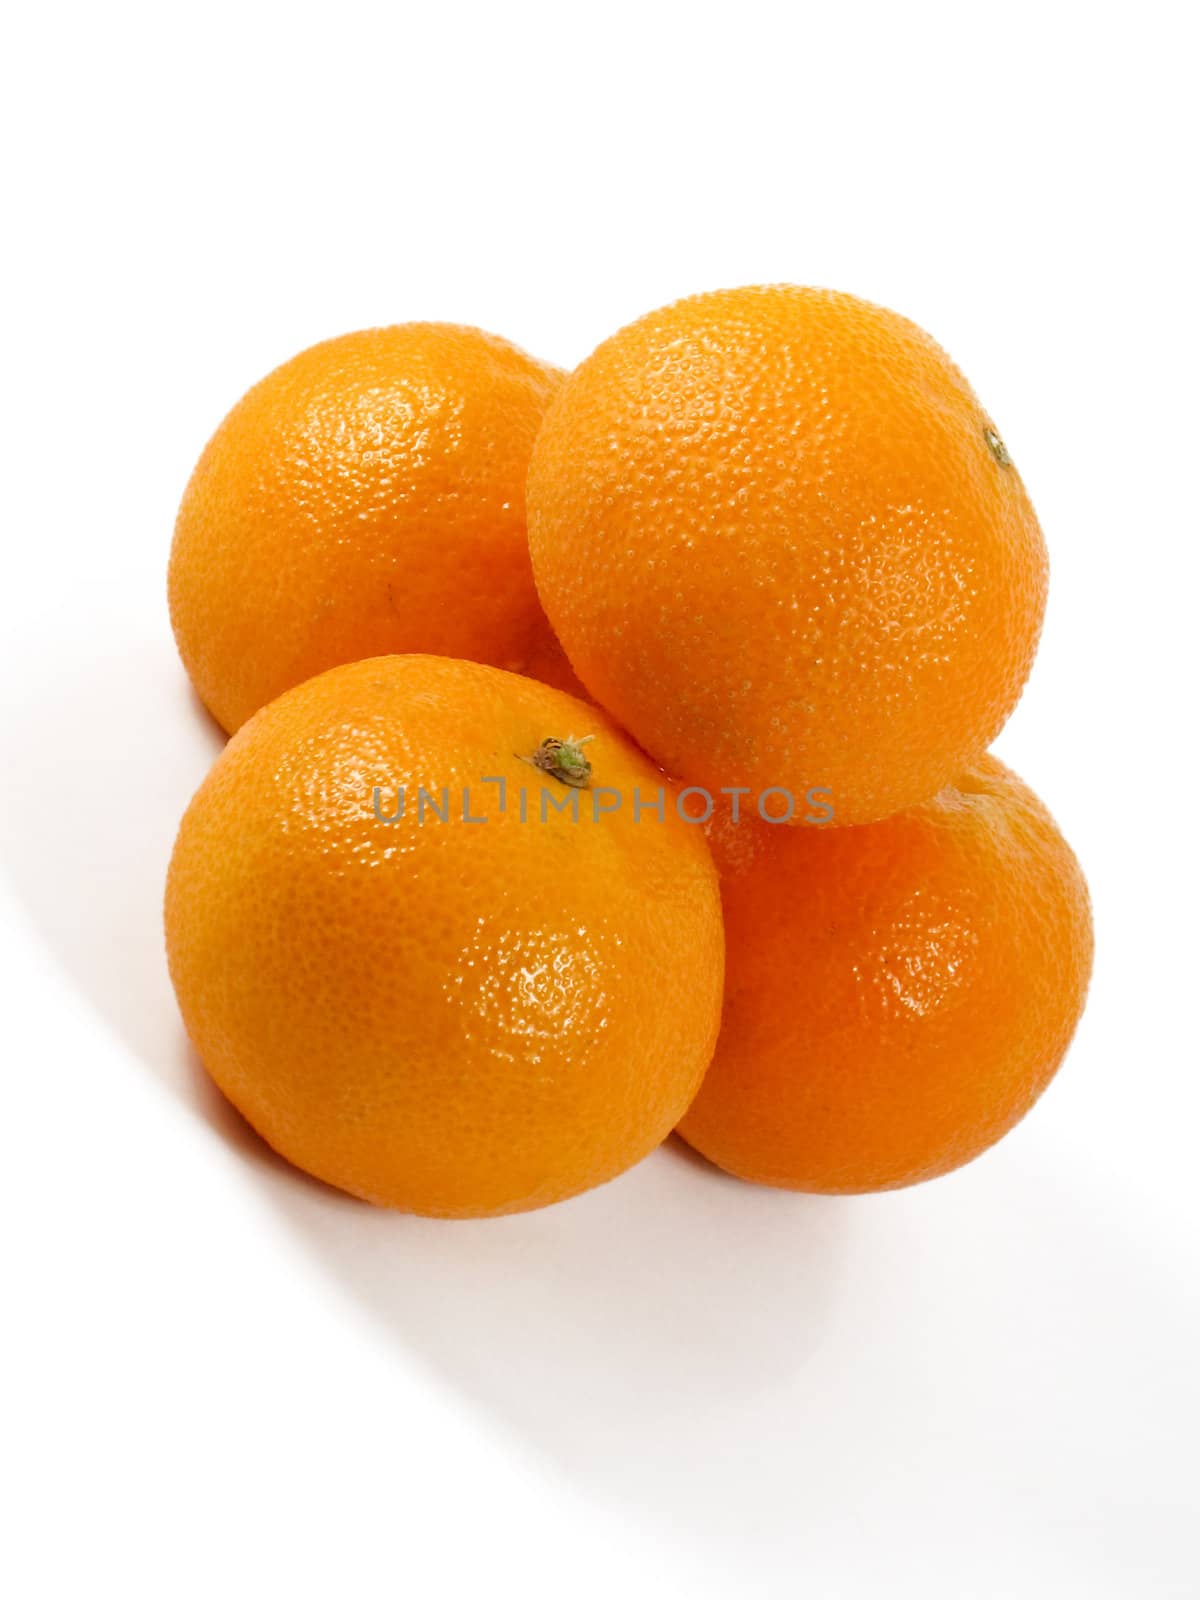 Some tangerines are photographed at an angle in 45 degrees